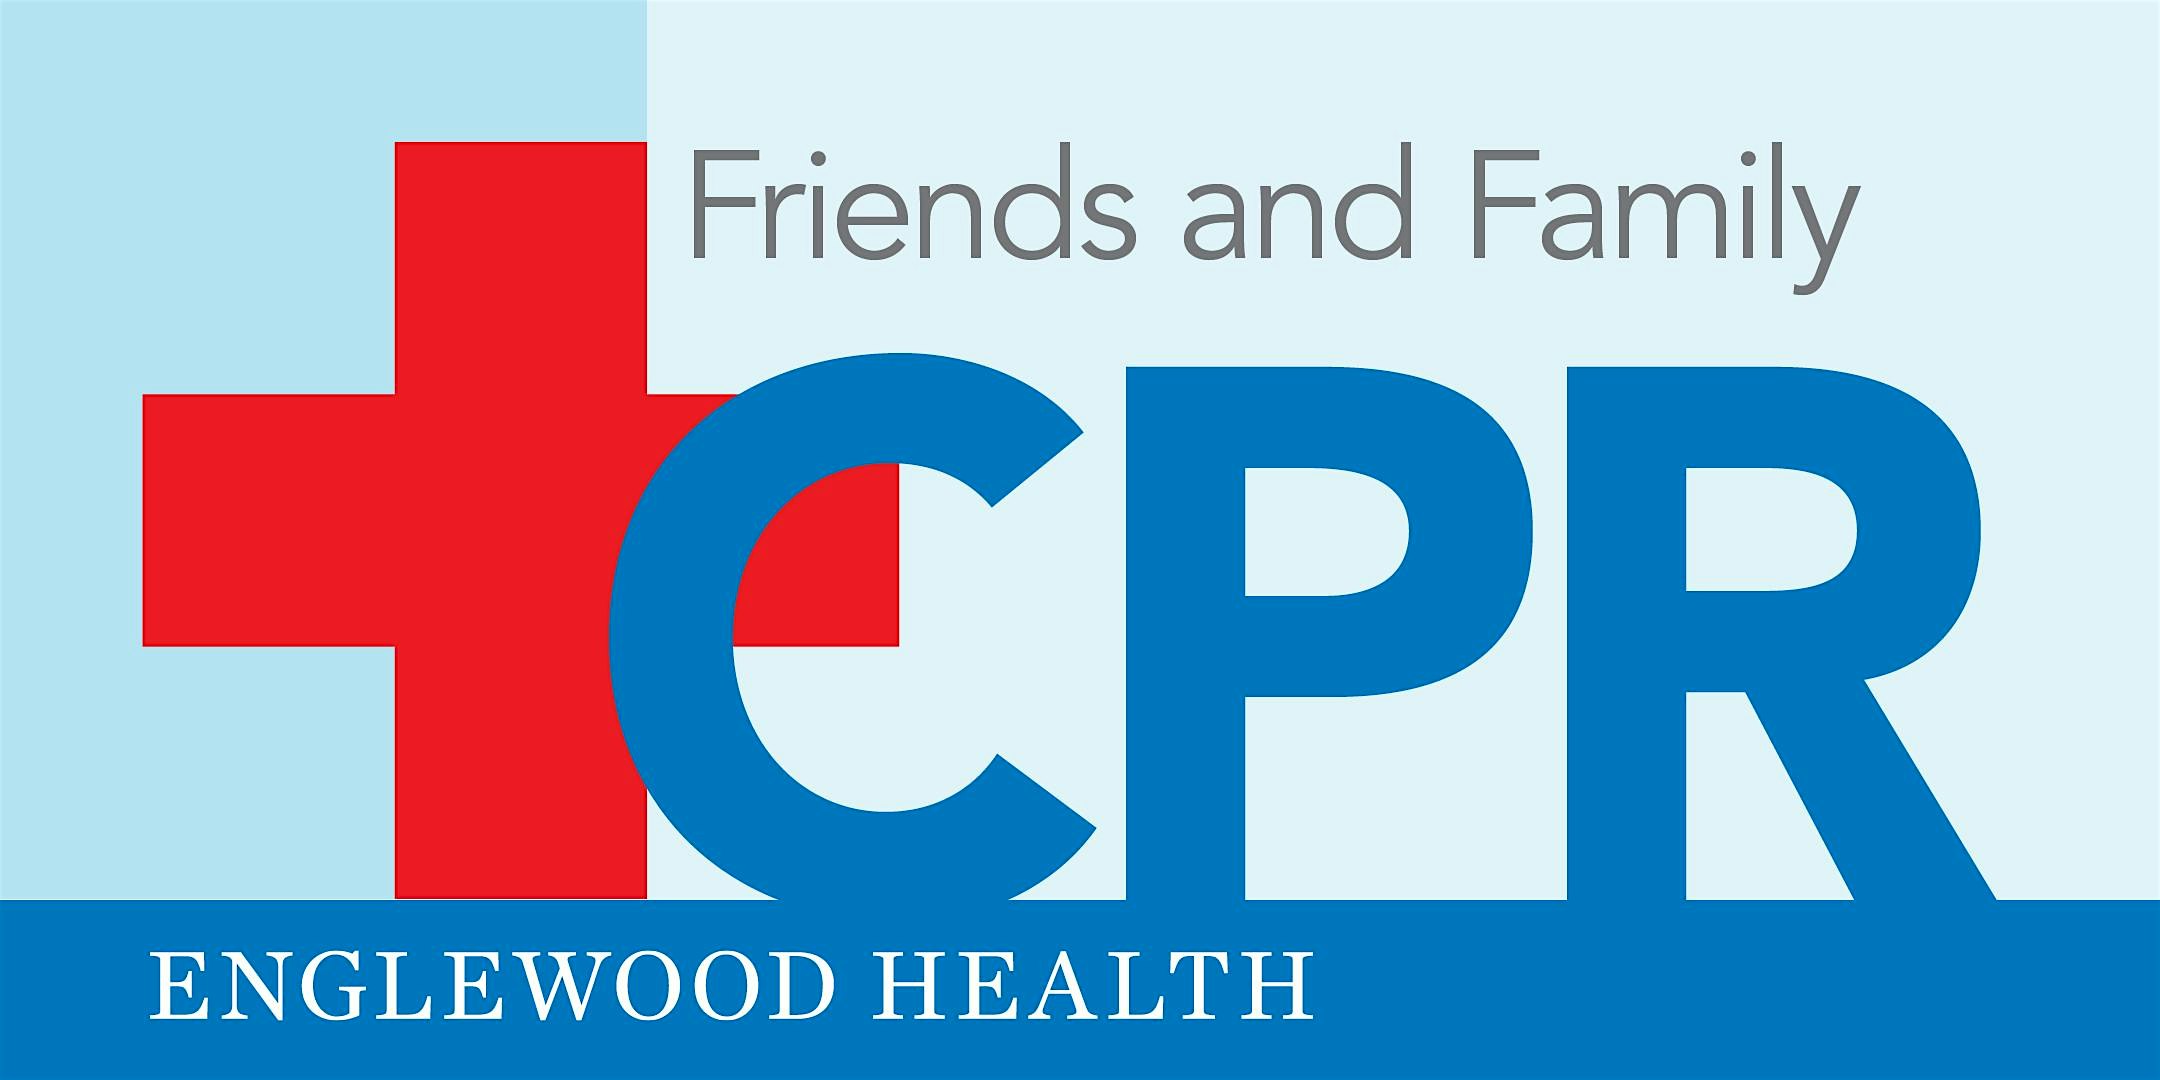 More info: Friends and Family CPR